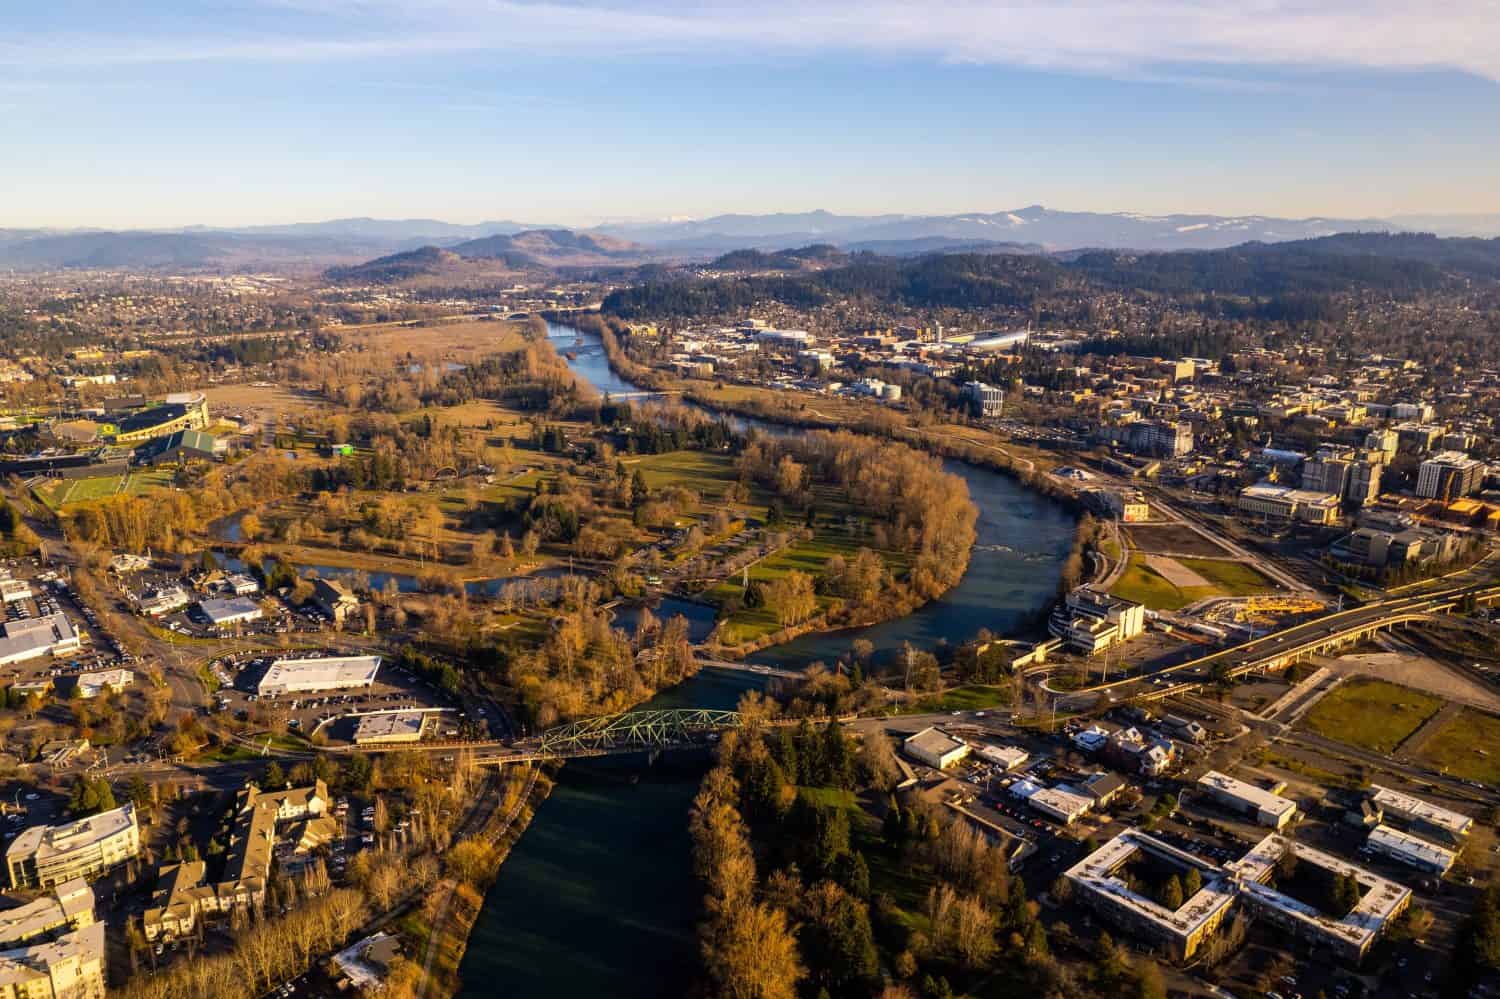 An aerial photo of the Willamette river and Eugene Oregon